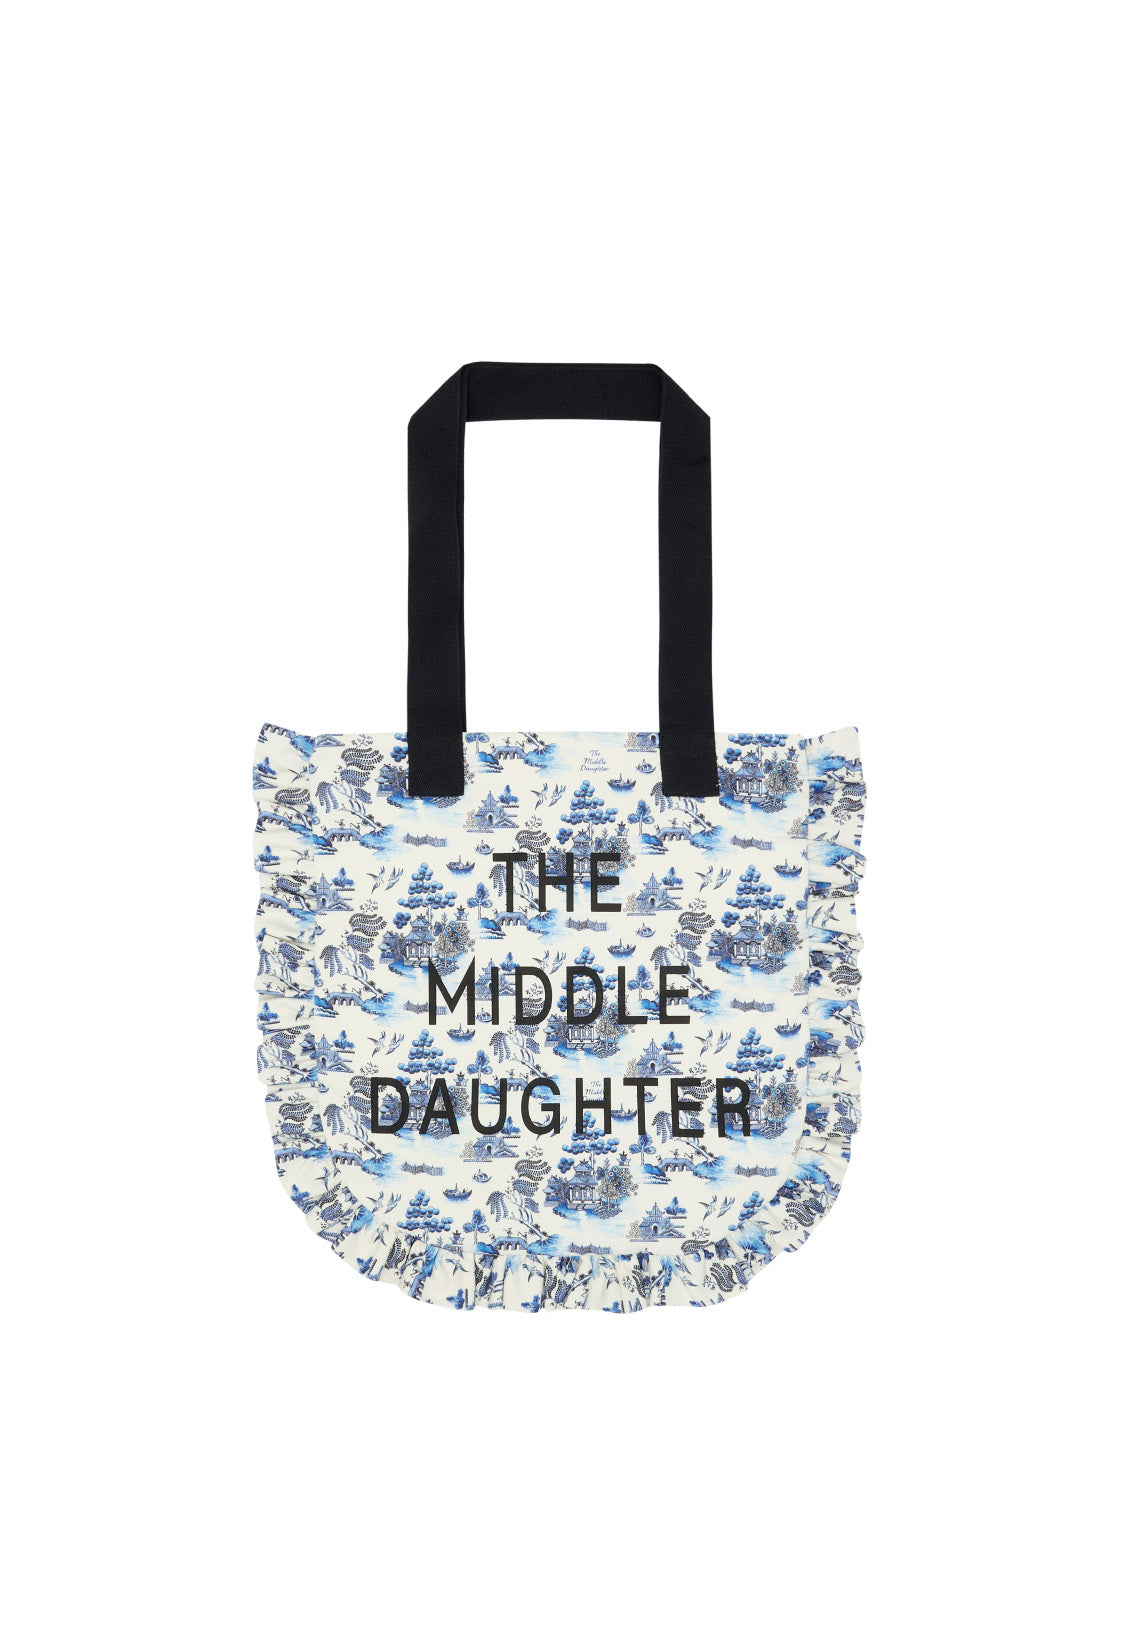 You're Tote-Ally Indispensable (& Frilling Too)